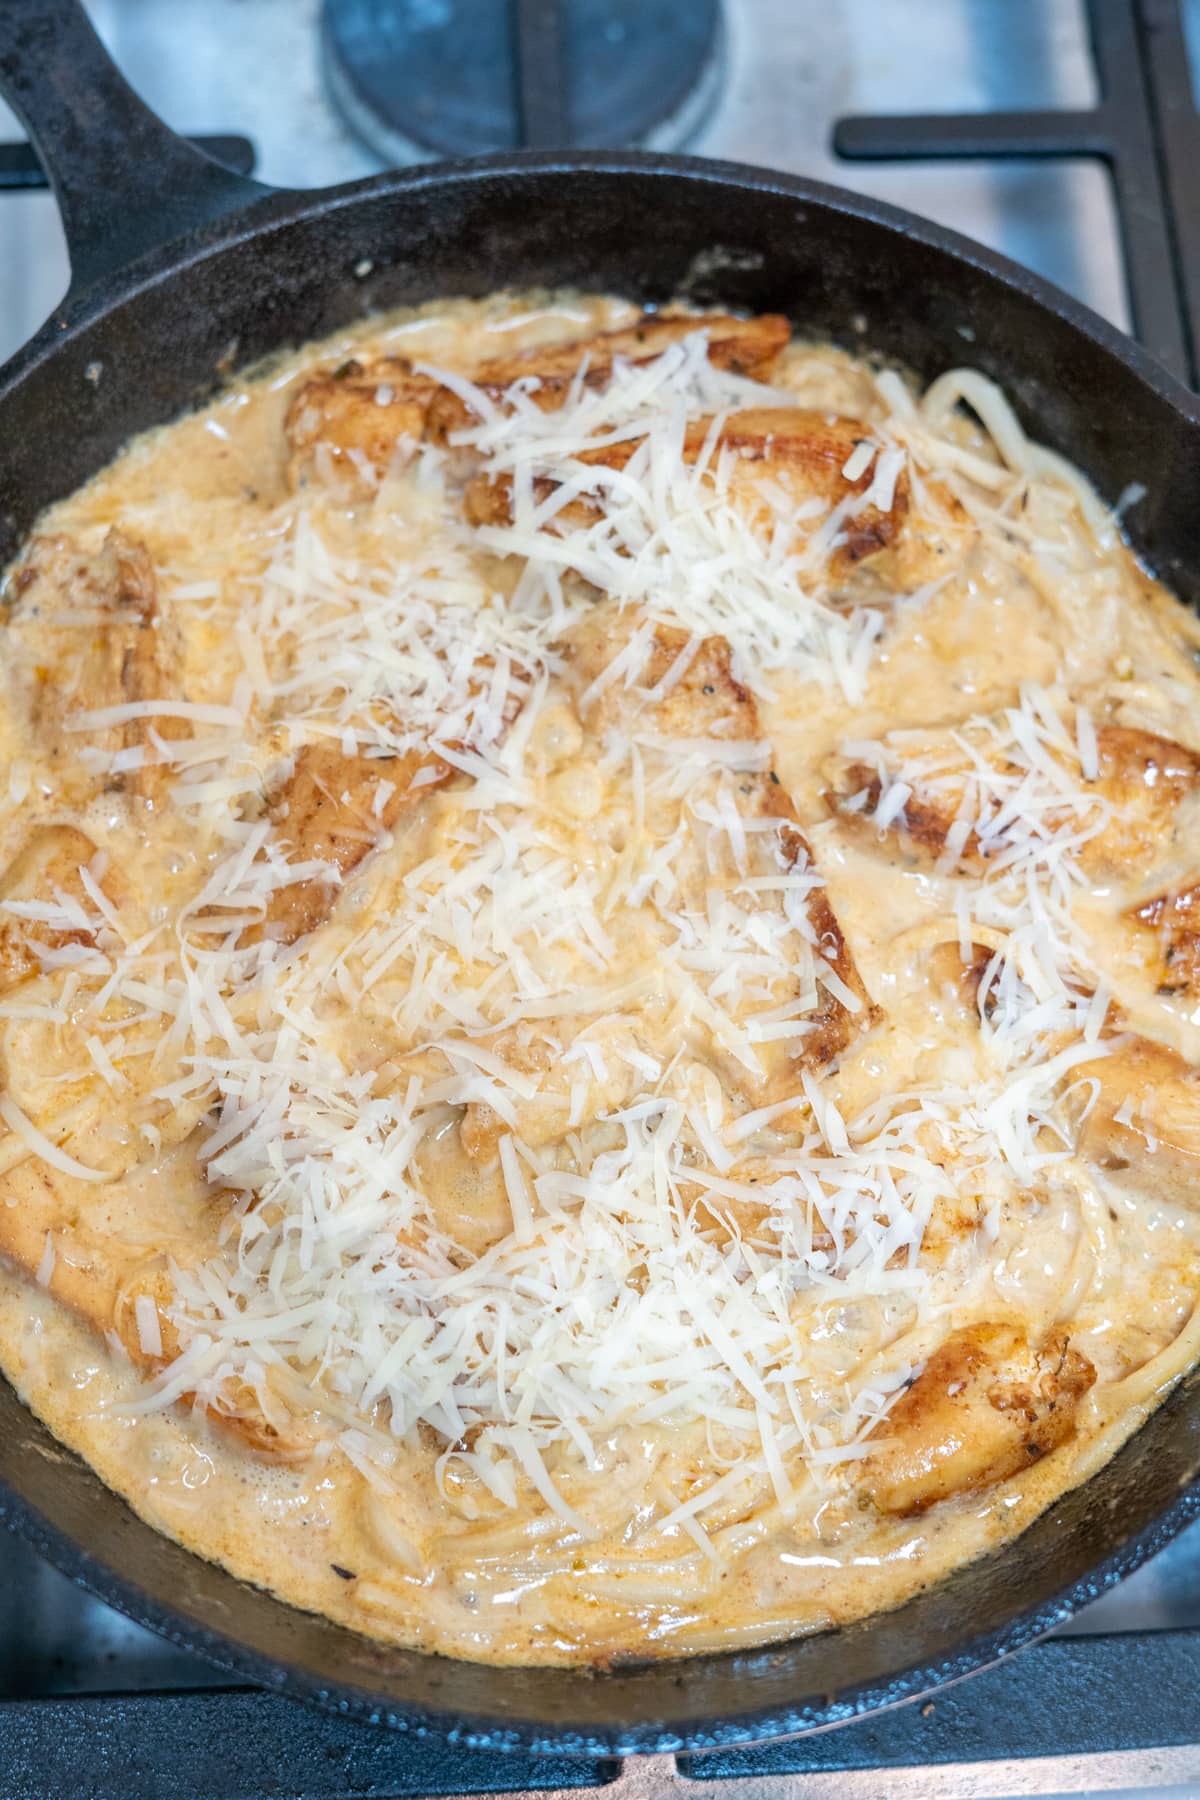 A skillet filled with cajun chicken and cheese on a stove top.